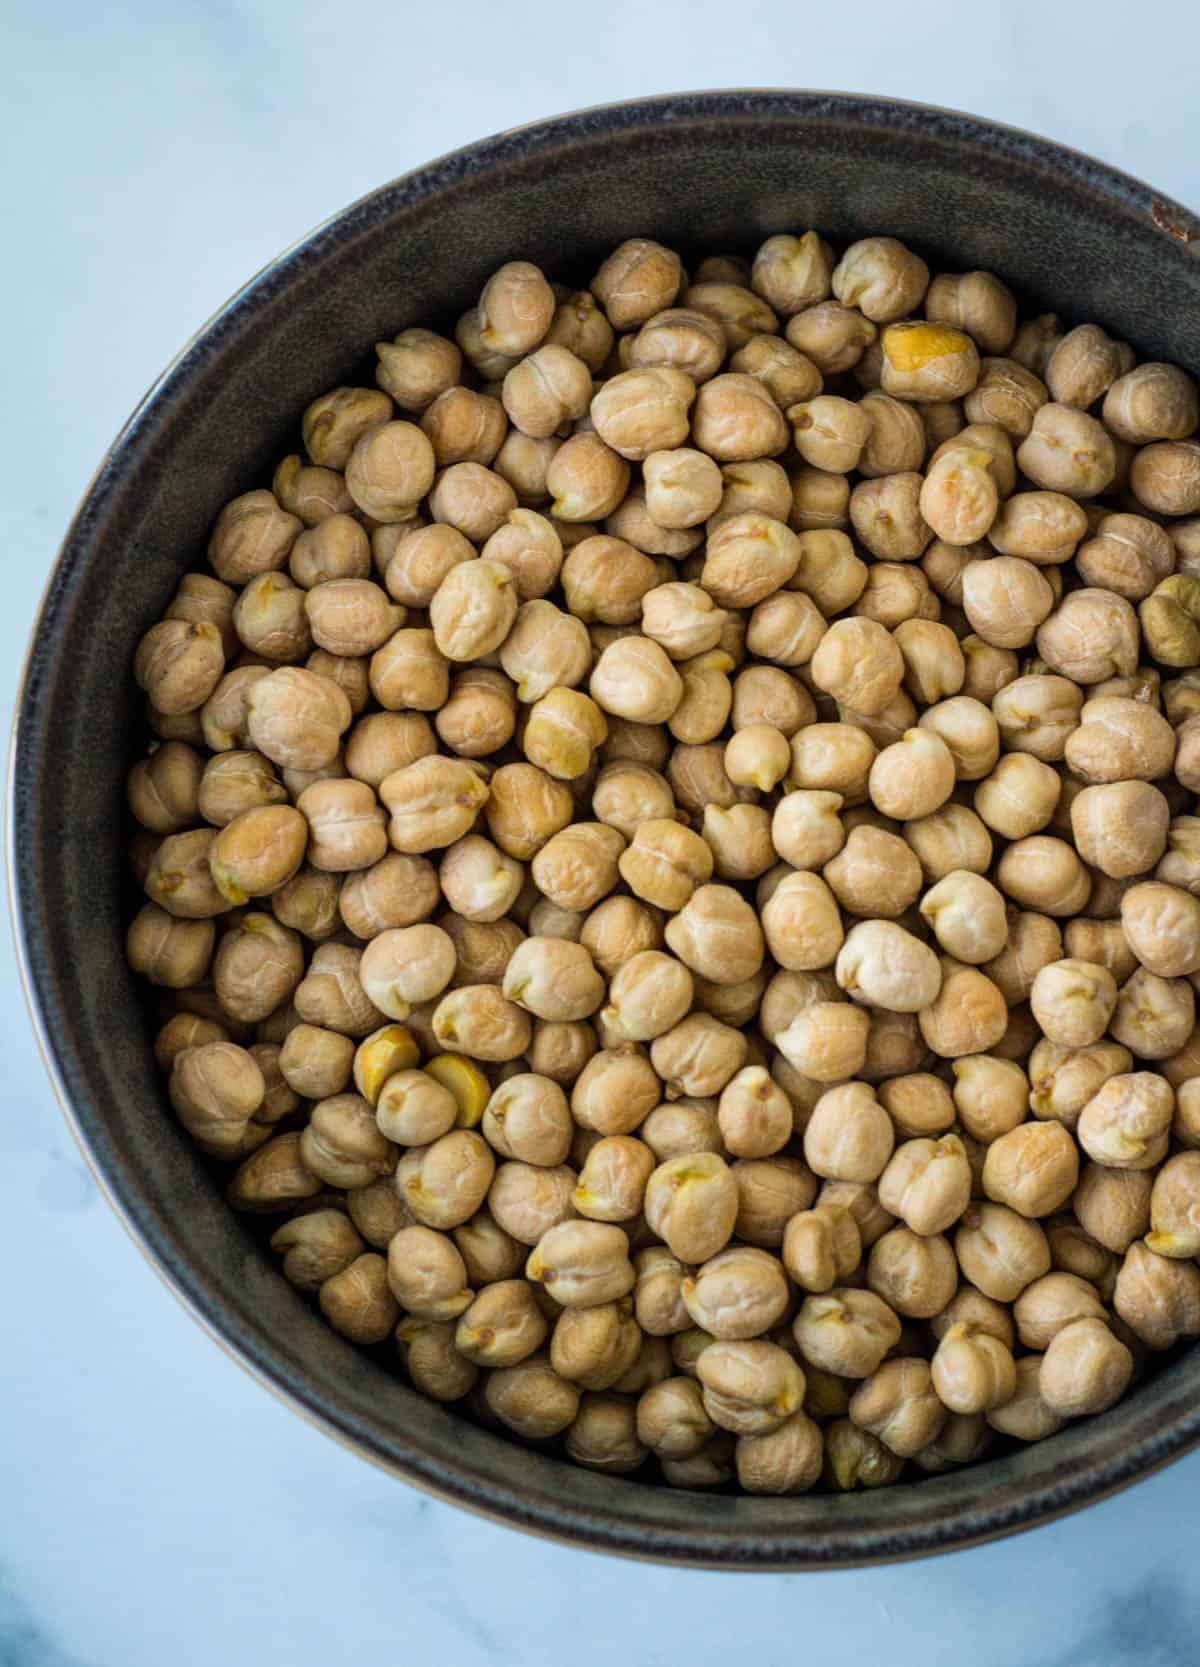 a bowl of dried garbonzo beans, also known as chickpeas